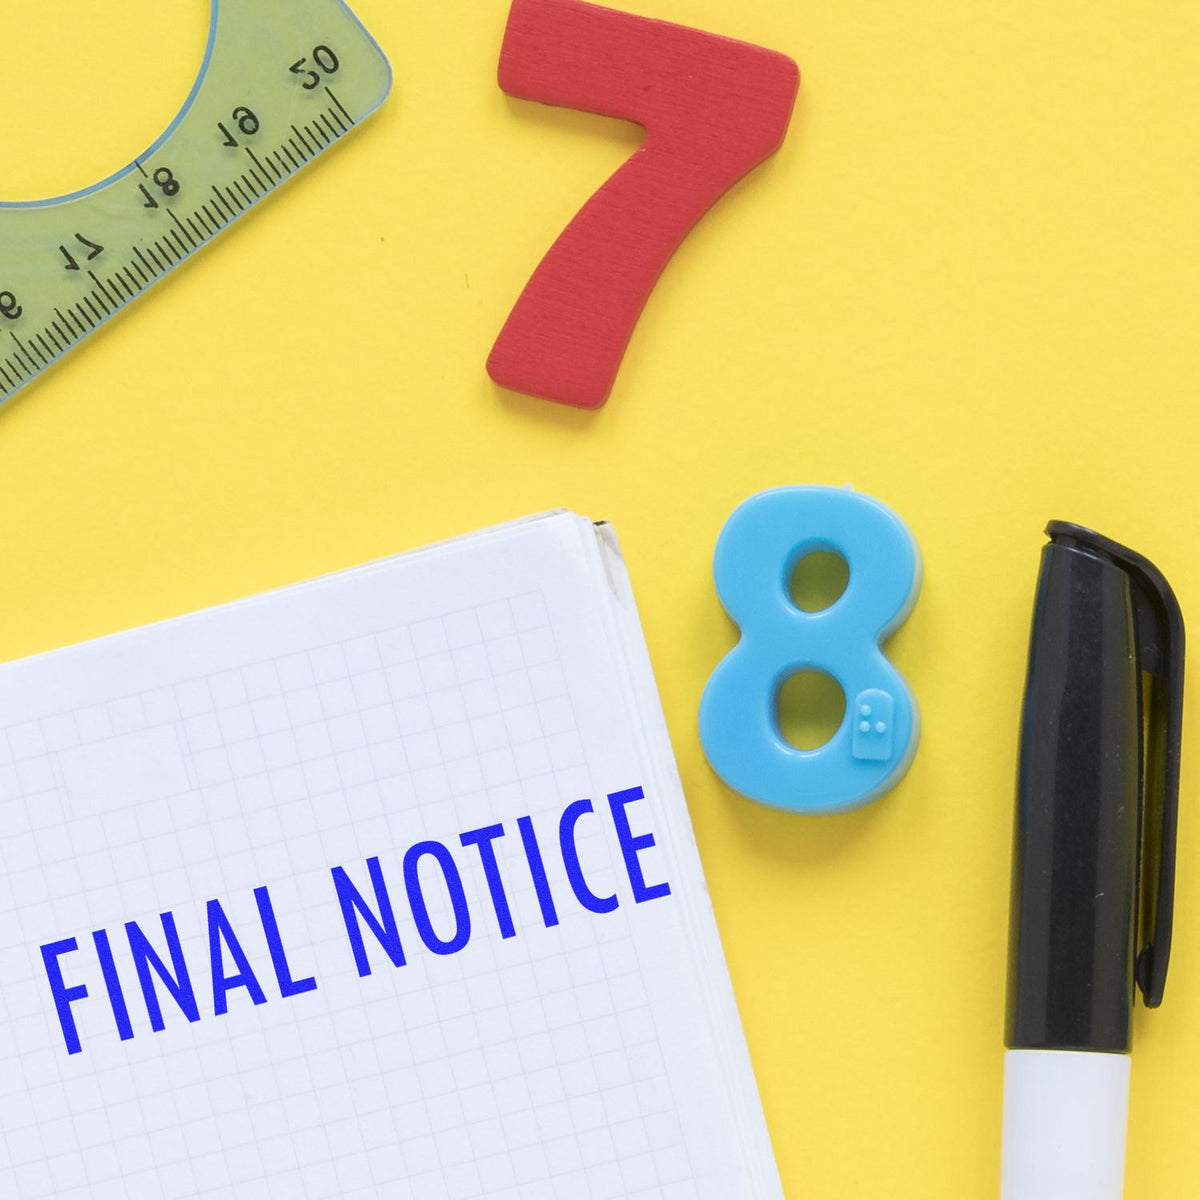 Large Final Notice Rubber Stamp In Use Photo